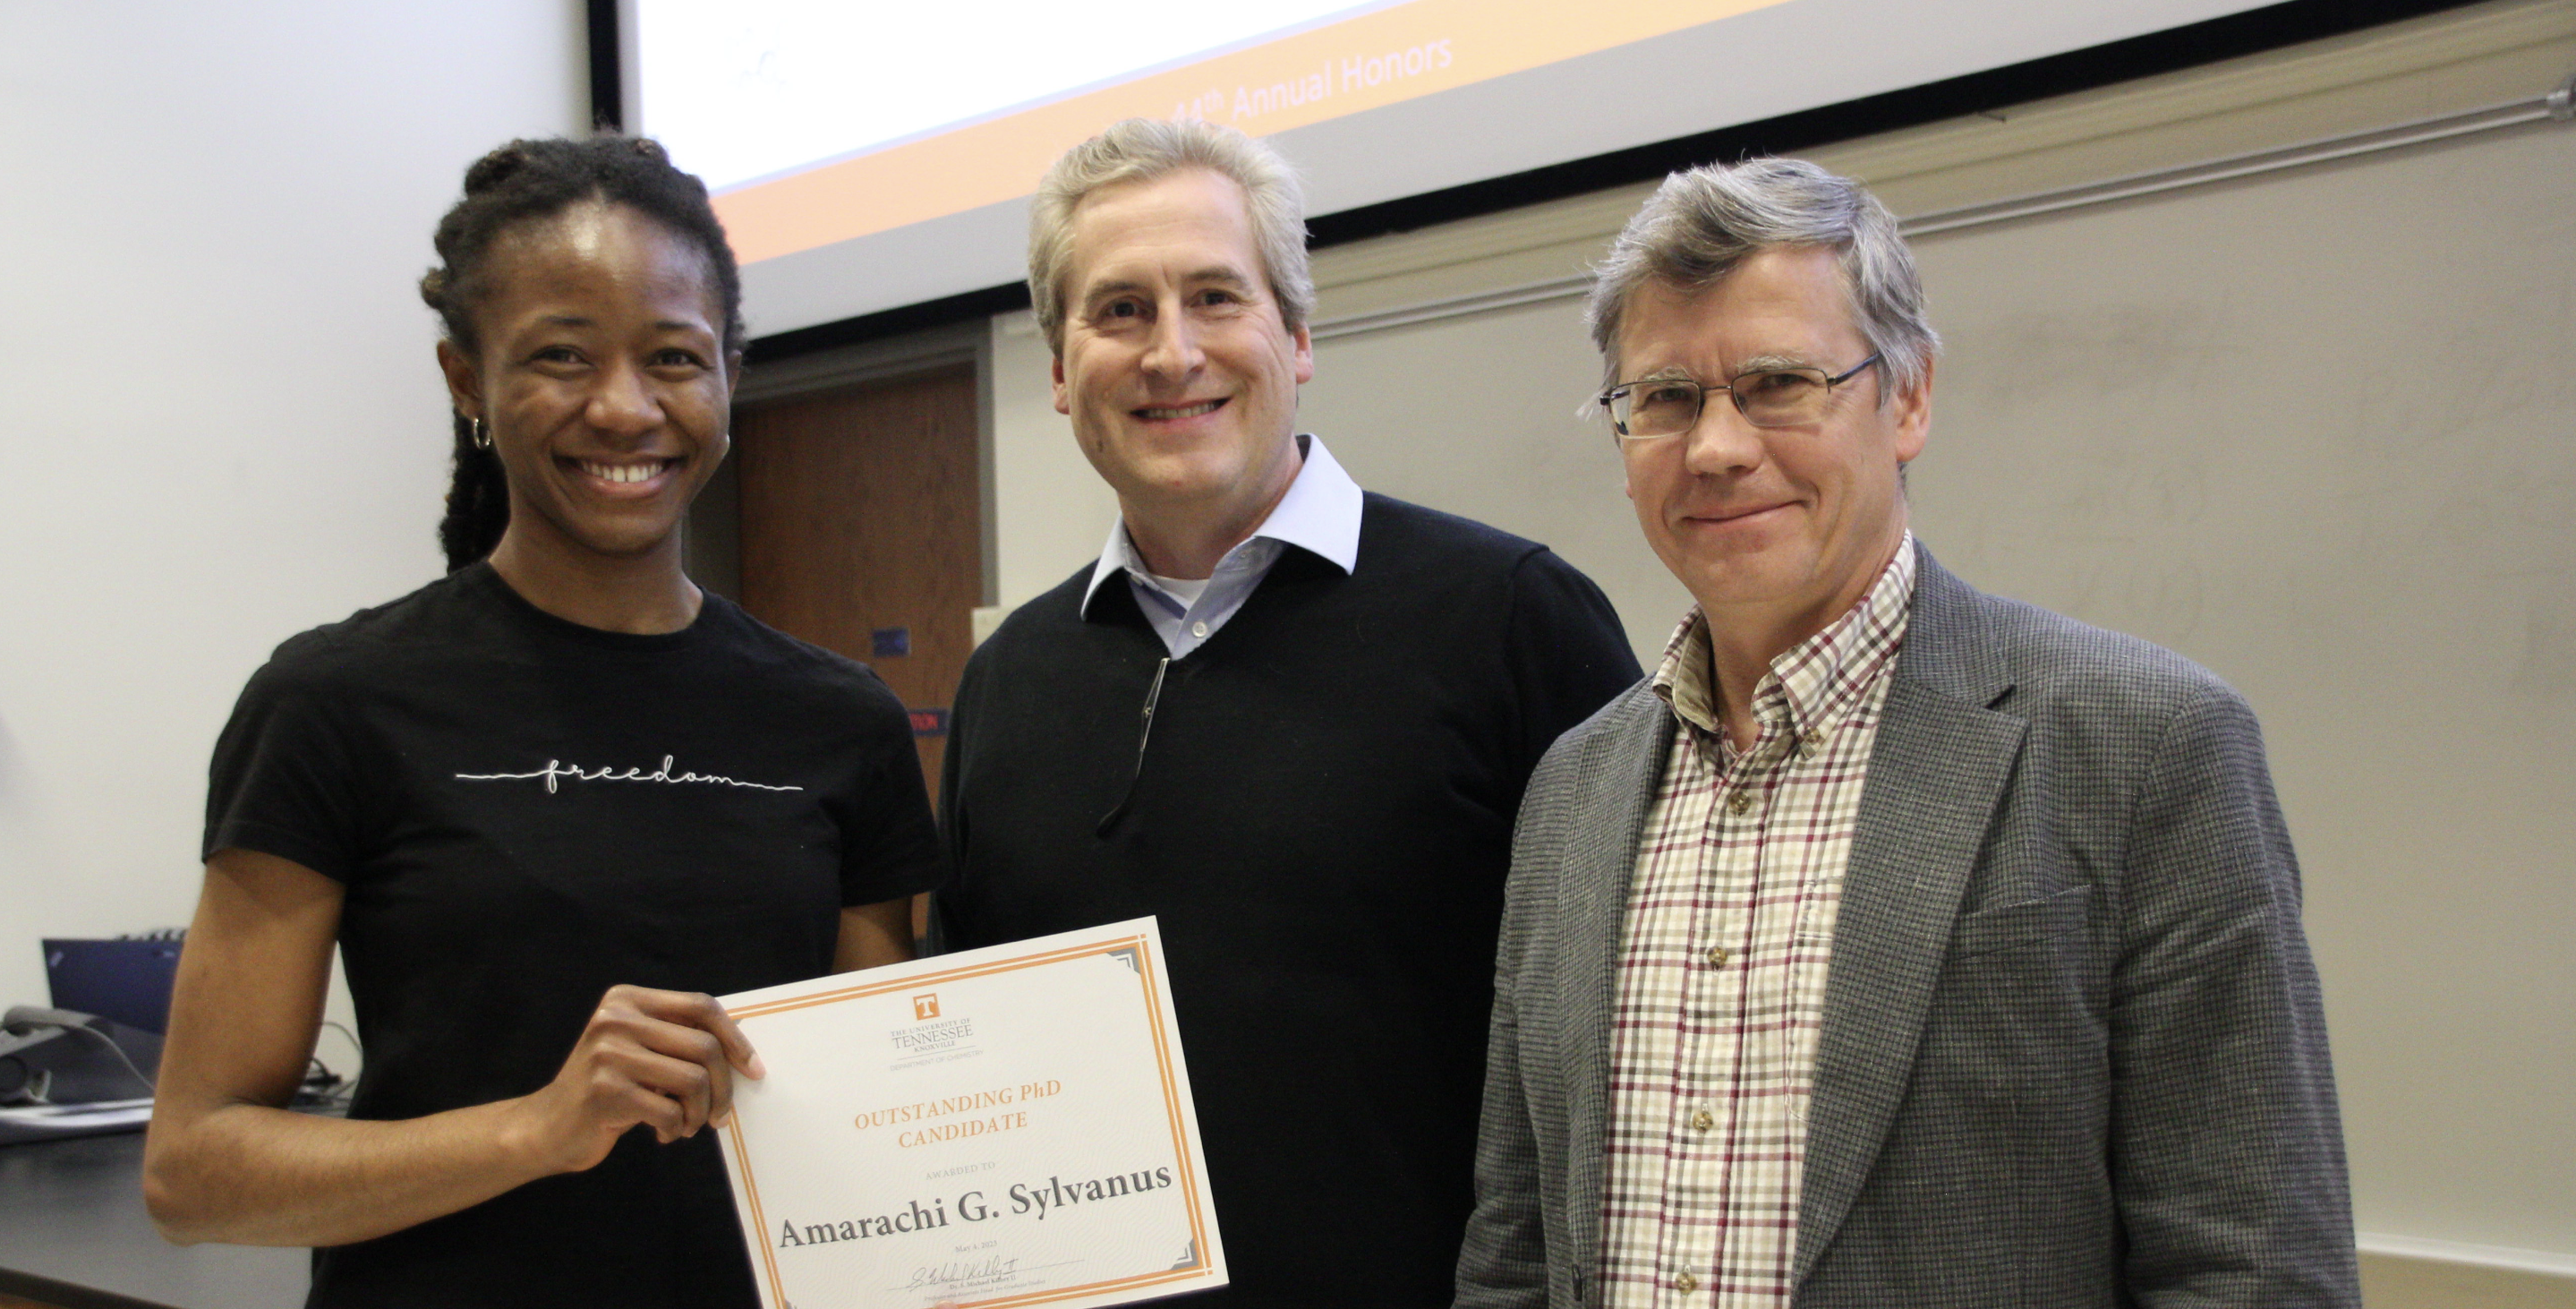 Amarachi Sylvanus poses for a photo with two men, holding a certificate for the Outstanding PhD Candidate award